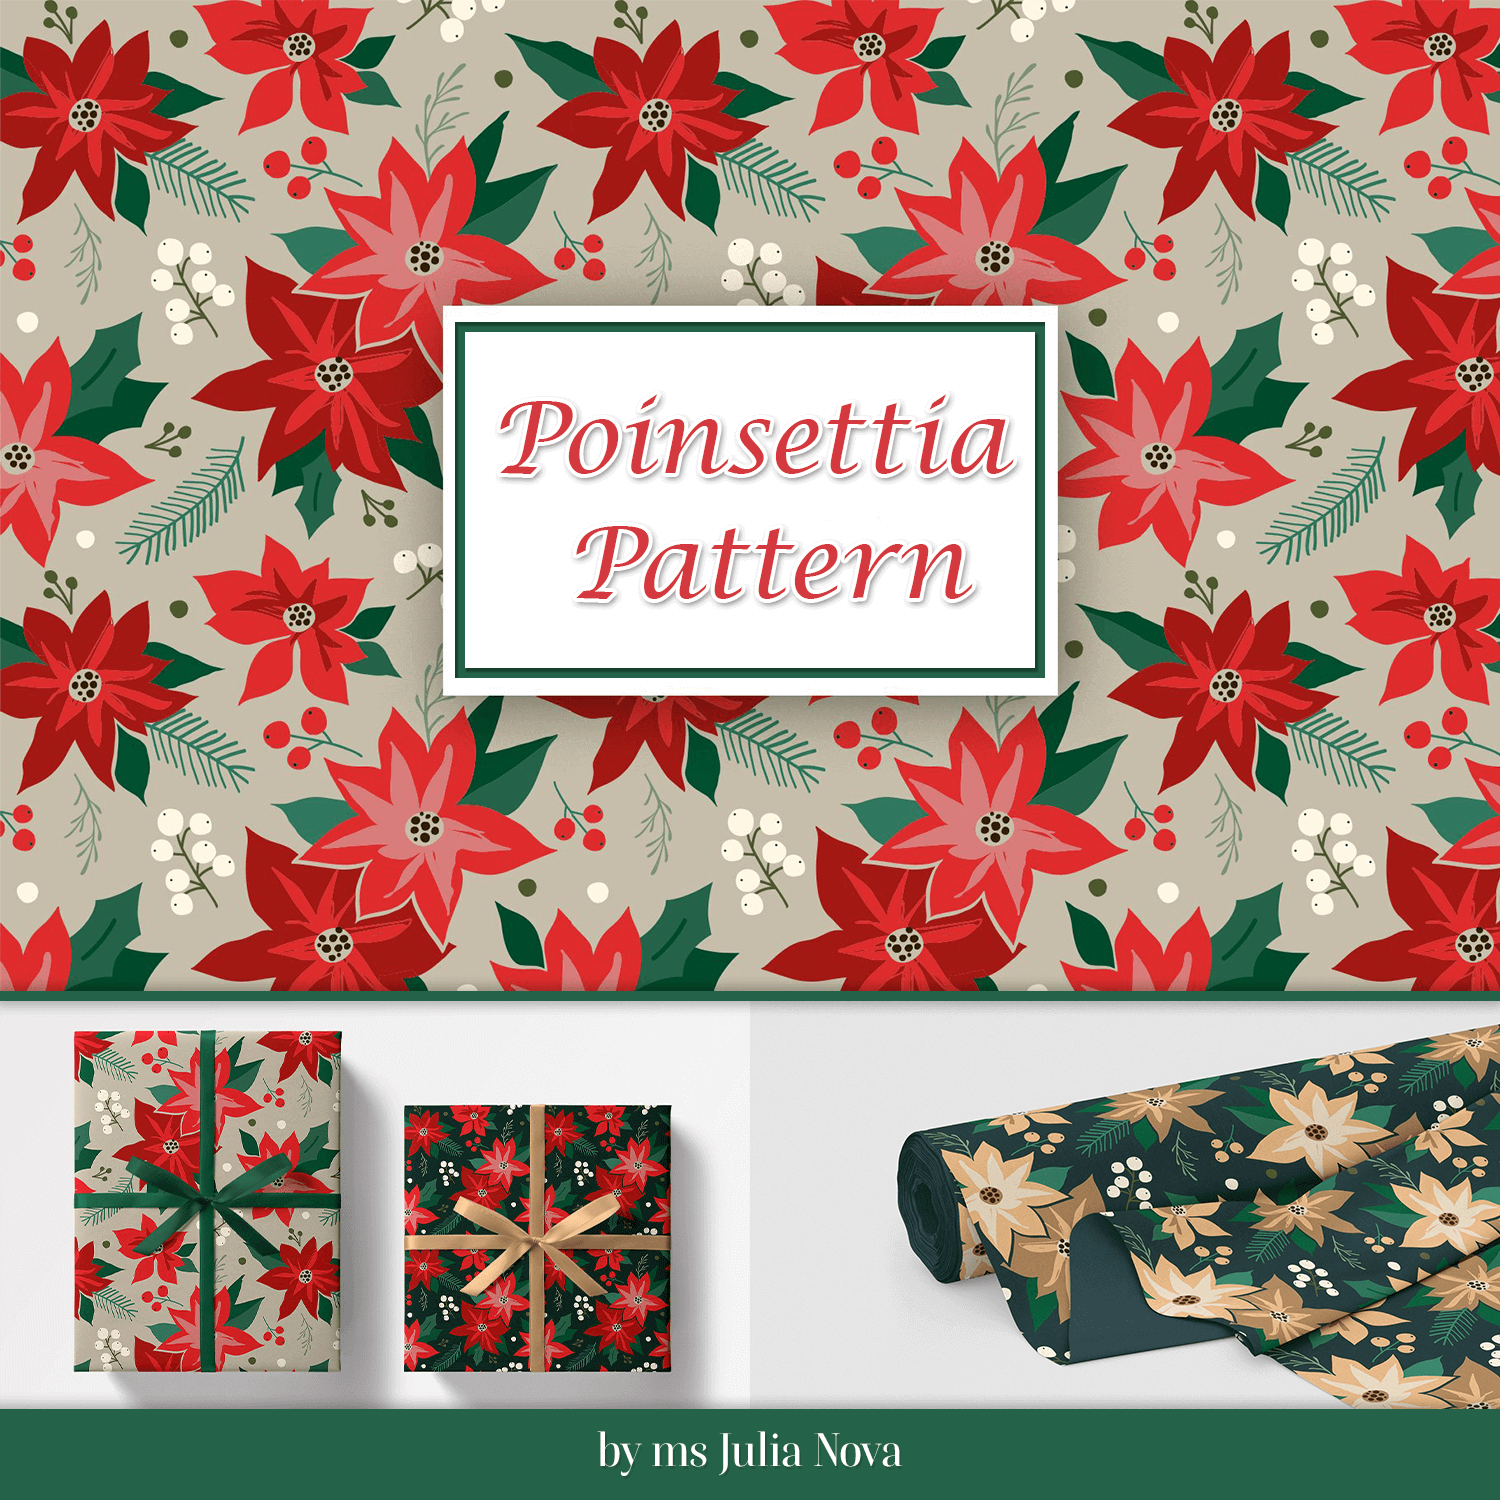 Using poinsettia patterns in everyday life.